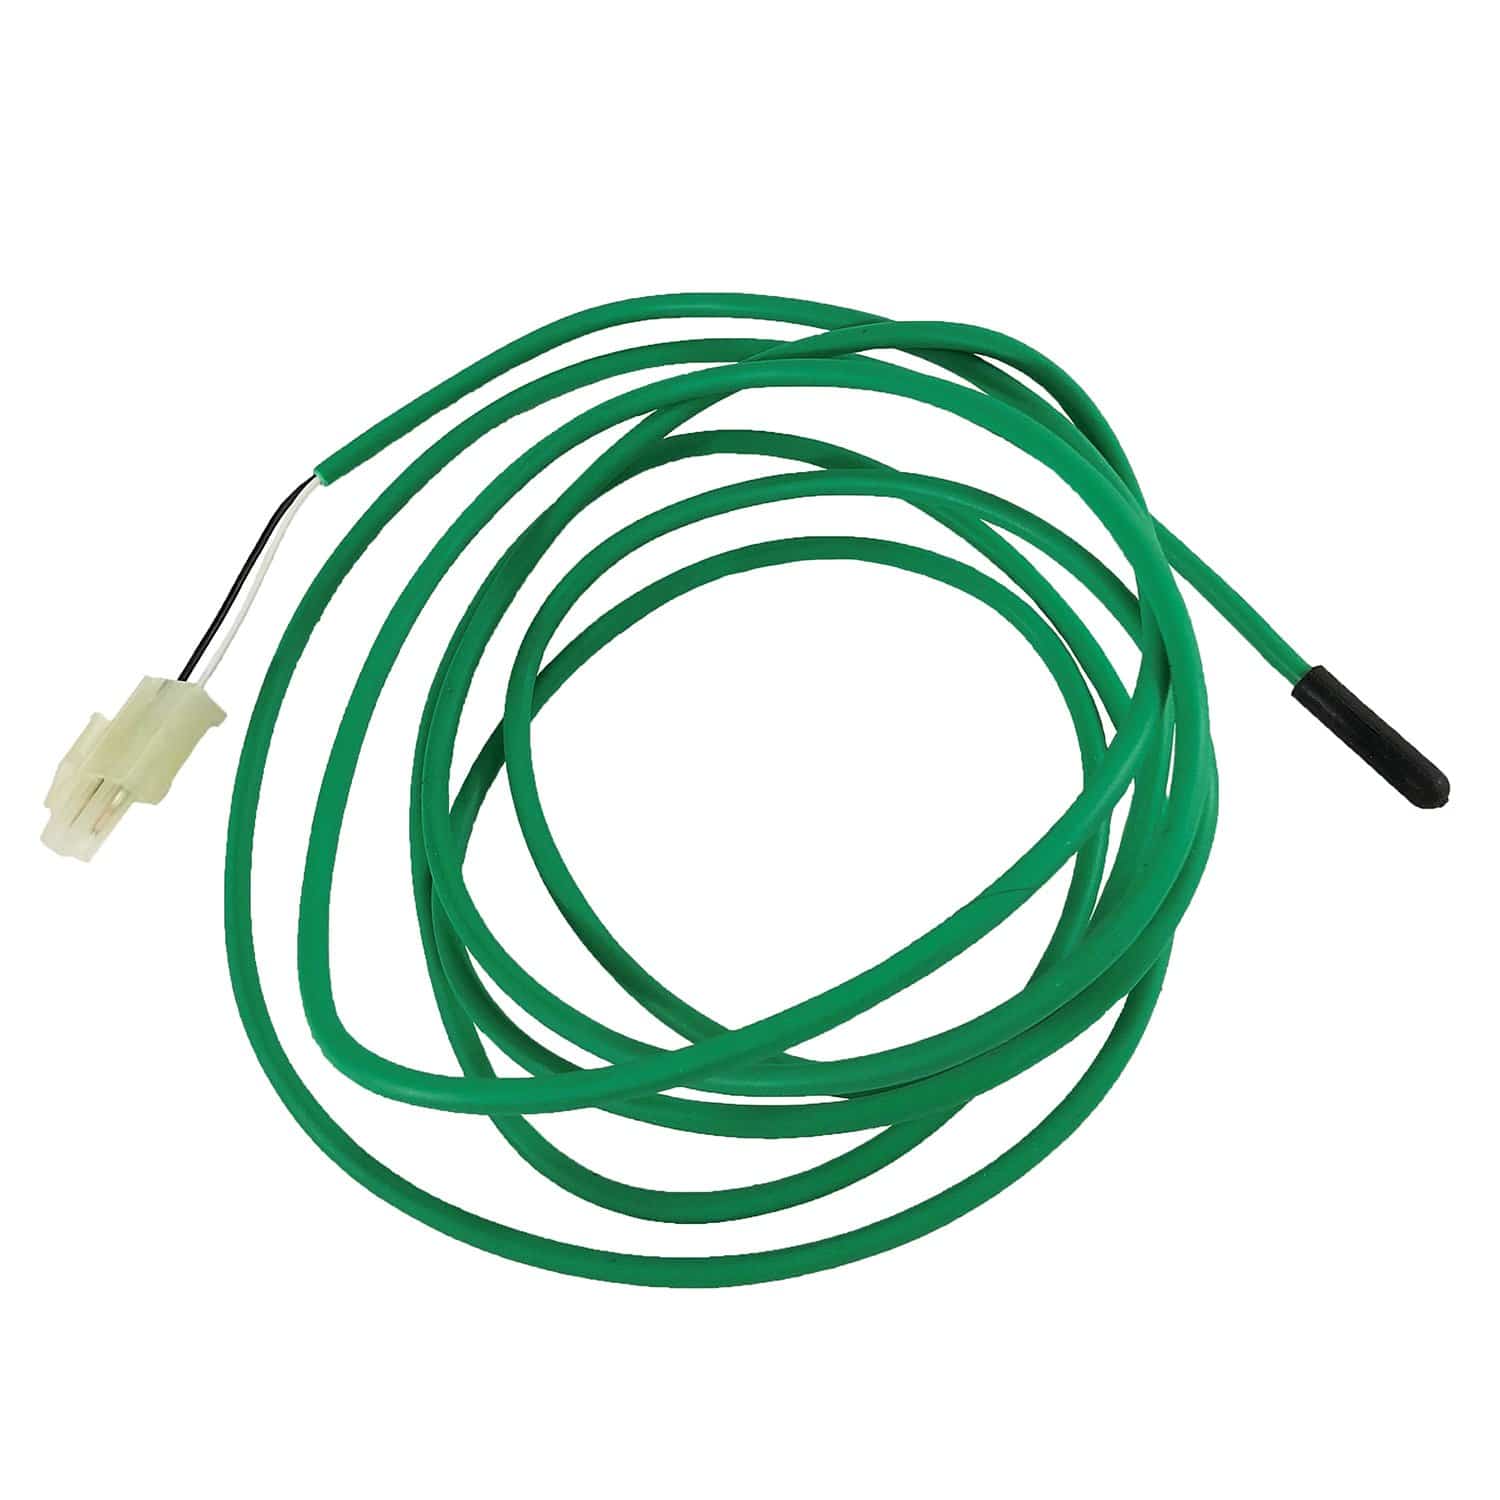 All Points F10221K Cabinet Air Sensor, 74 Inch, Green, Replaces Traulsen 334-60405-02